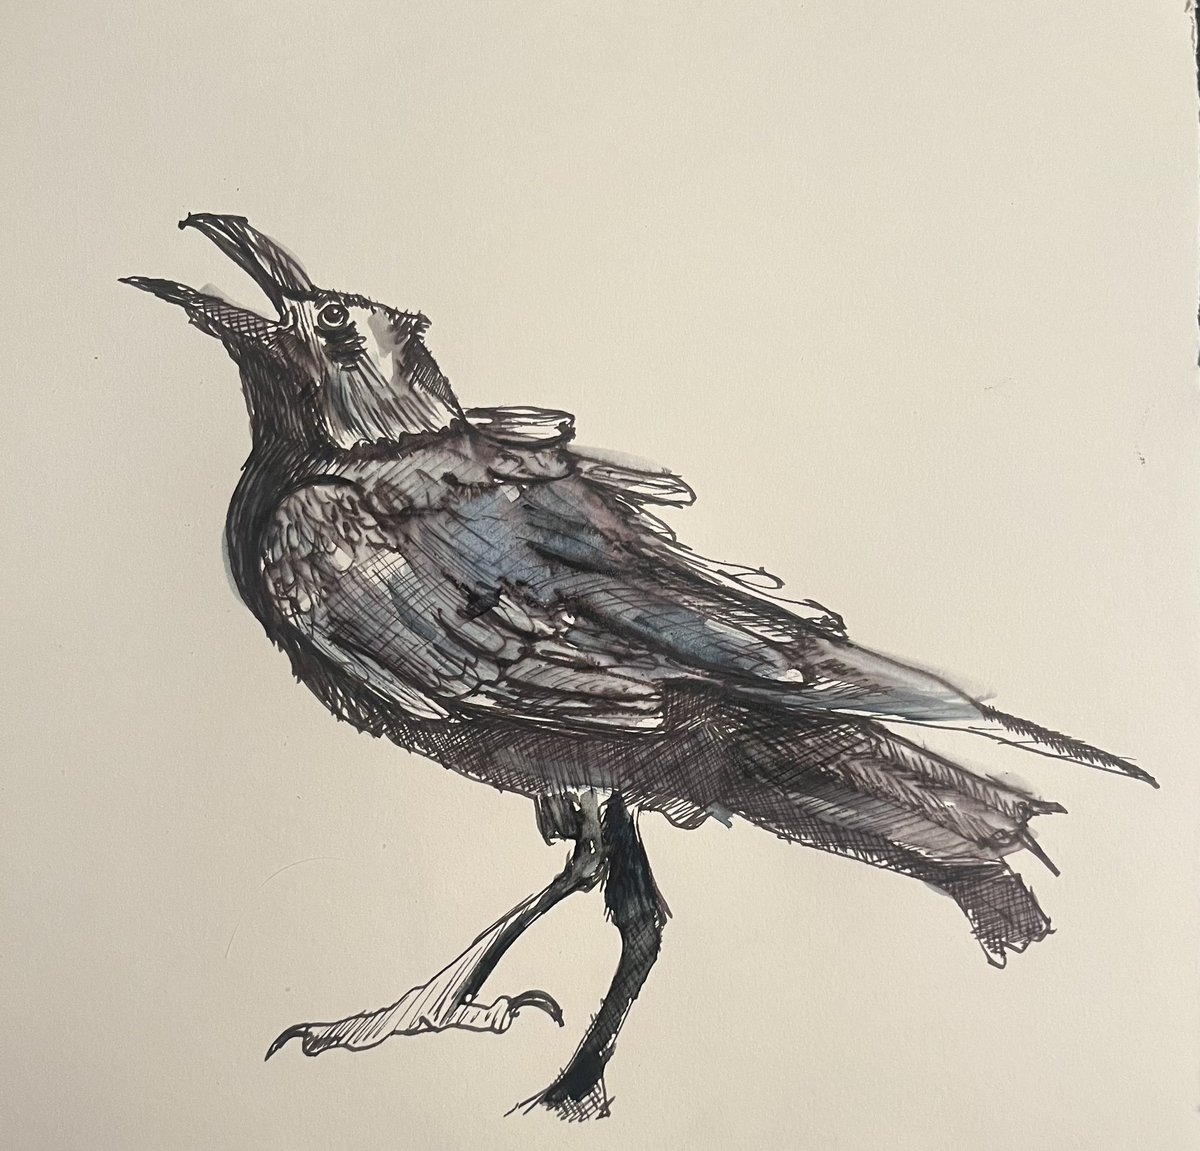 Messing around with a fountain pen and a touch of watercolour #doodle #penandwash #Raven #watercolour #leedsartist @KirkstallArt